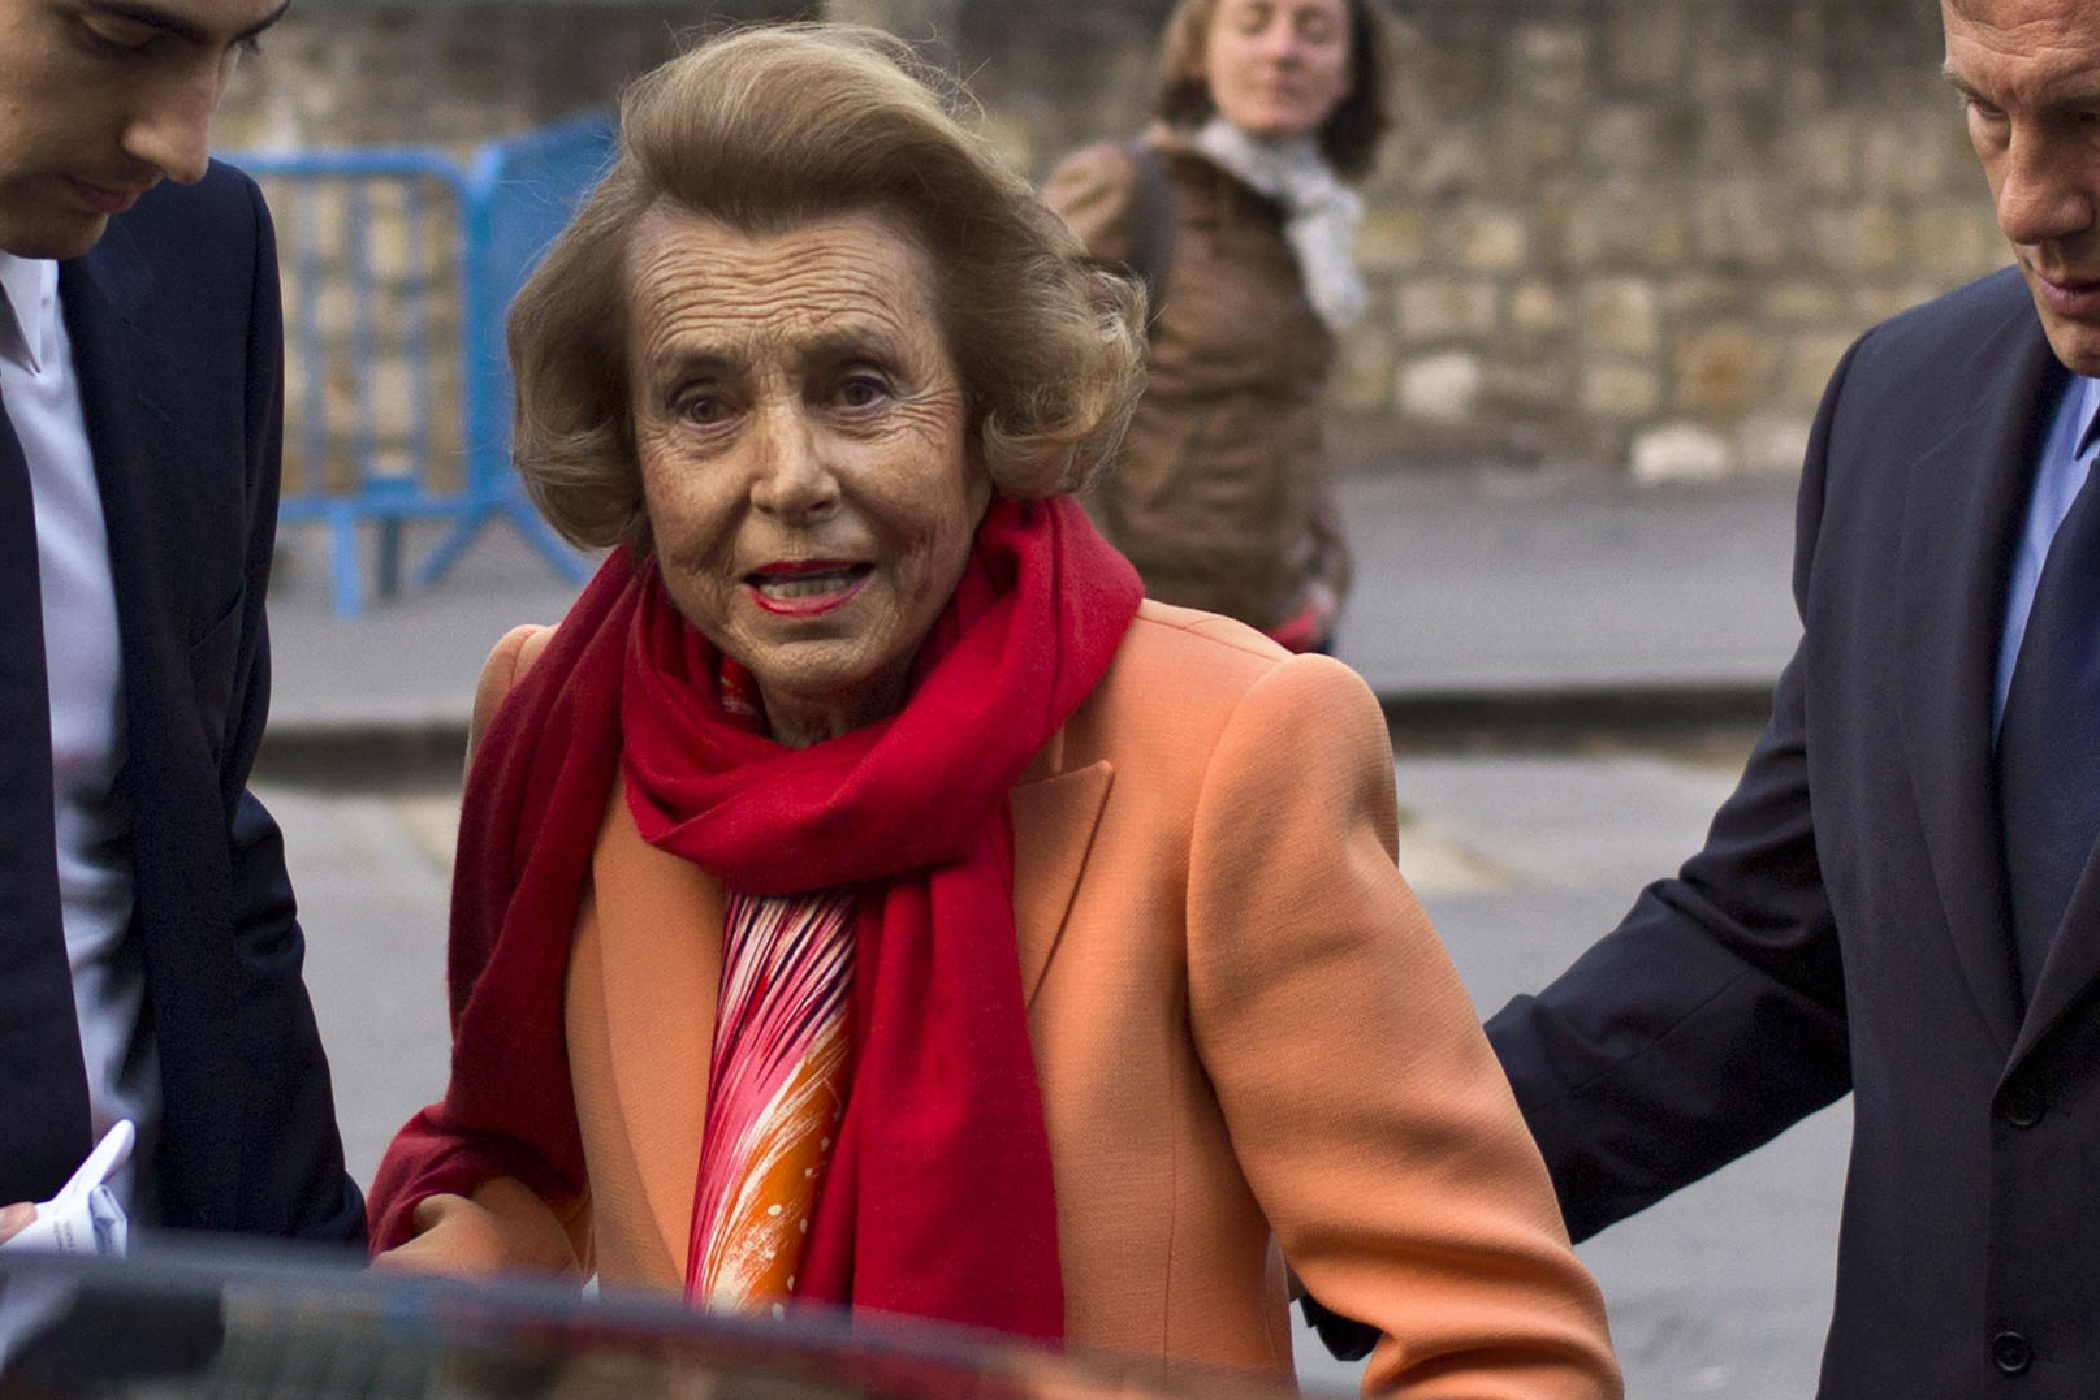 L'Oreal heiress Liliane Bettencourt, center, and her grandson Jean-Victor Meyers, second from left, leave the L'Oreal-UNESCO prize for the women in science, in Paris, March 29, 2012.